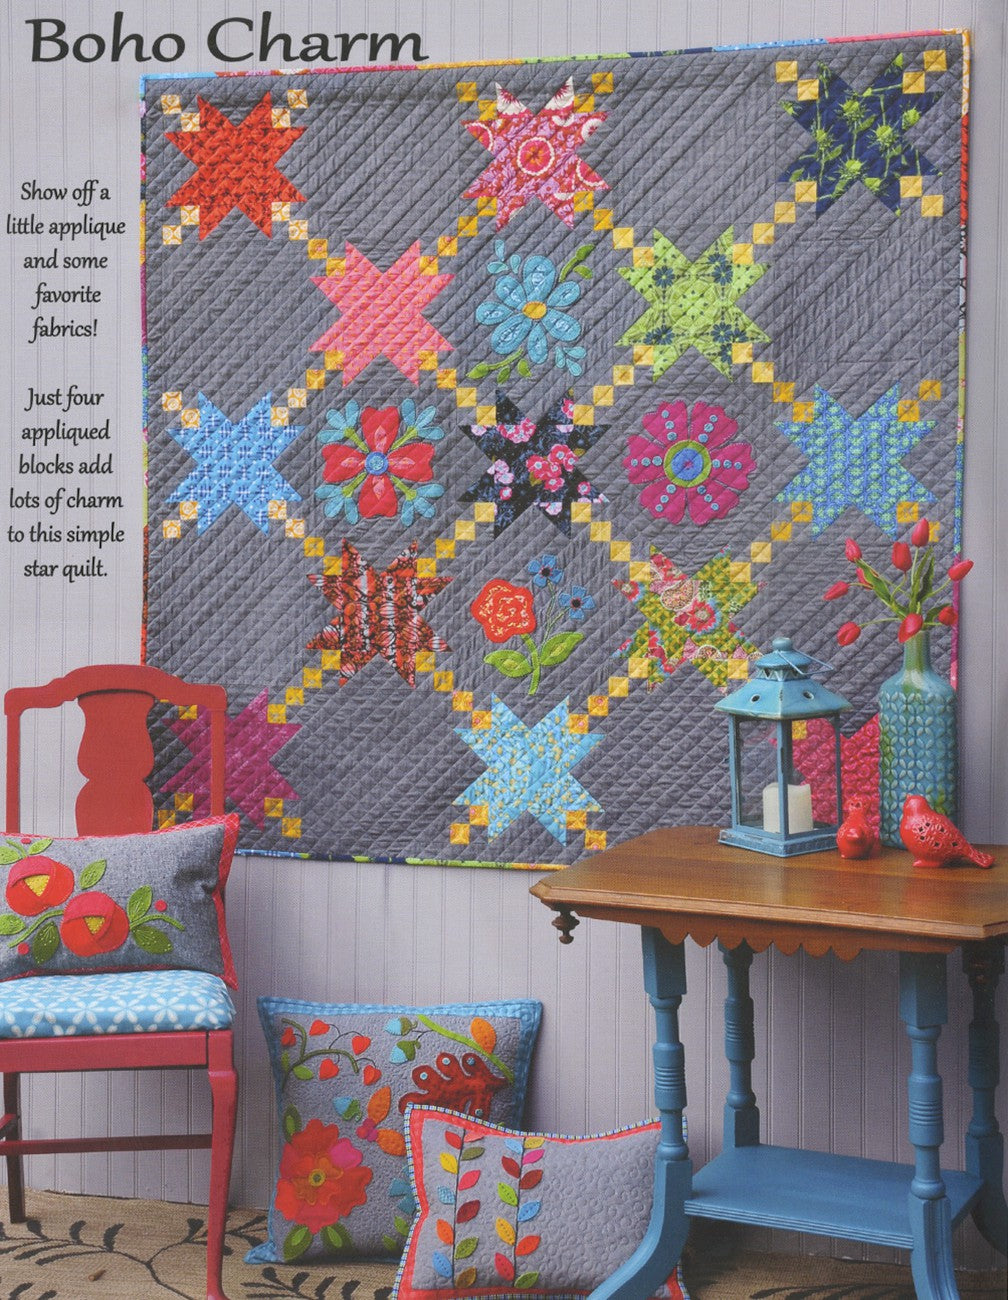 The Joyful Stitcher Quilt Pattern Book by Heather Peterson of Anka's Treasures